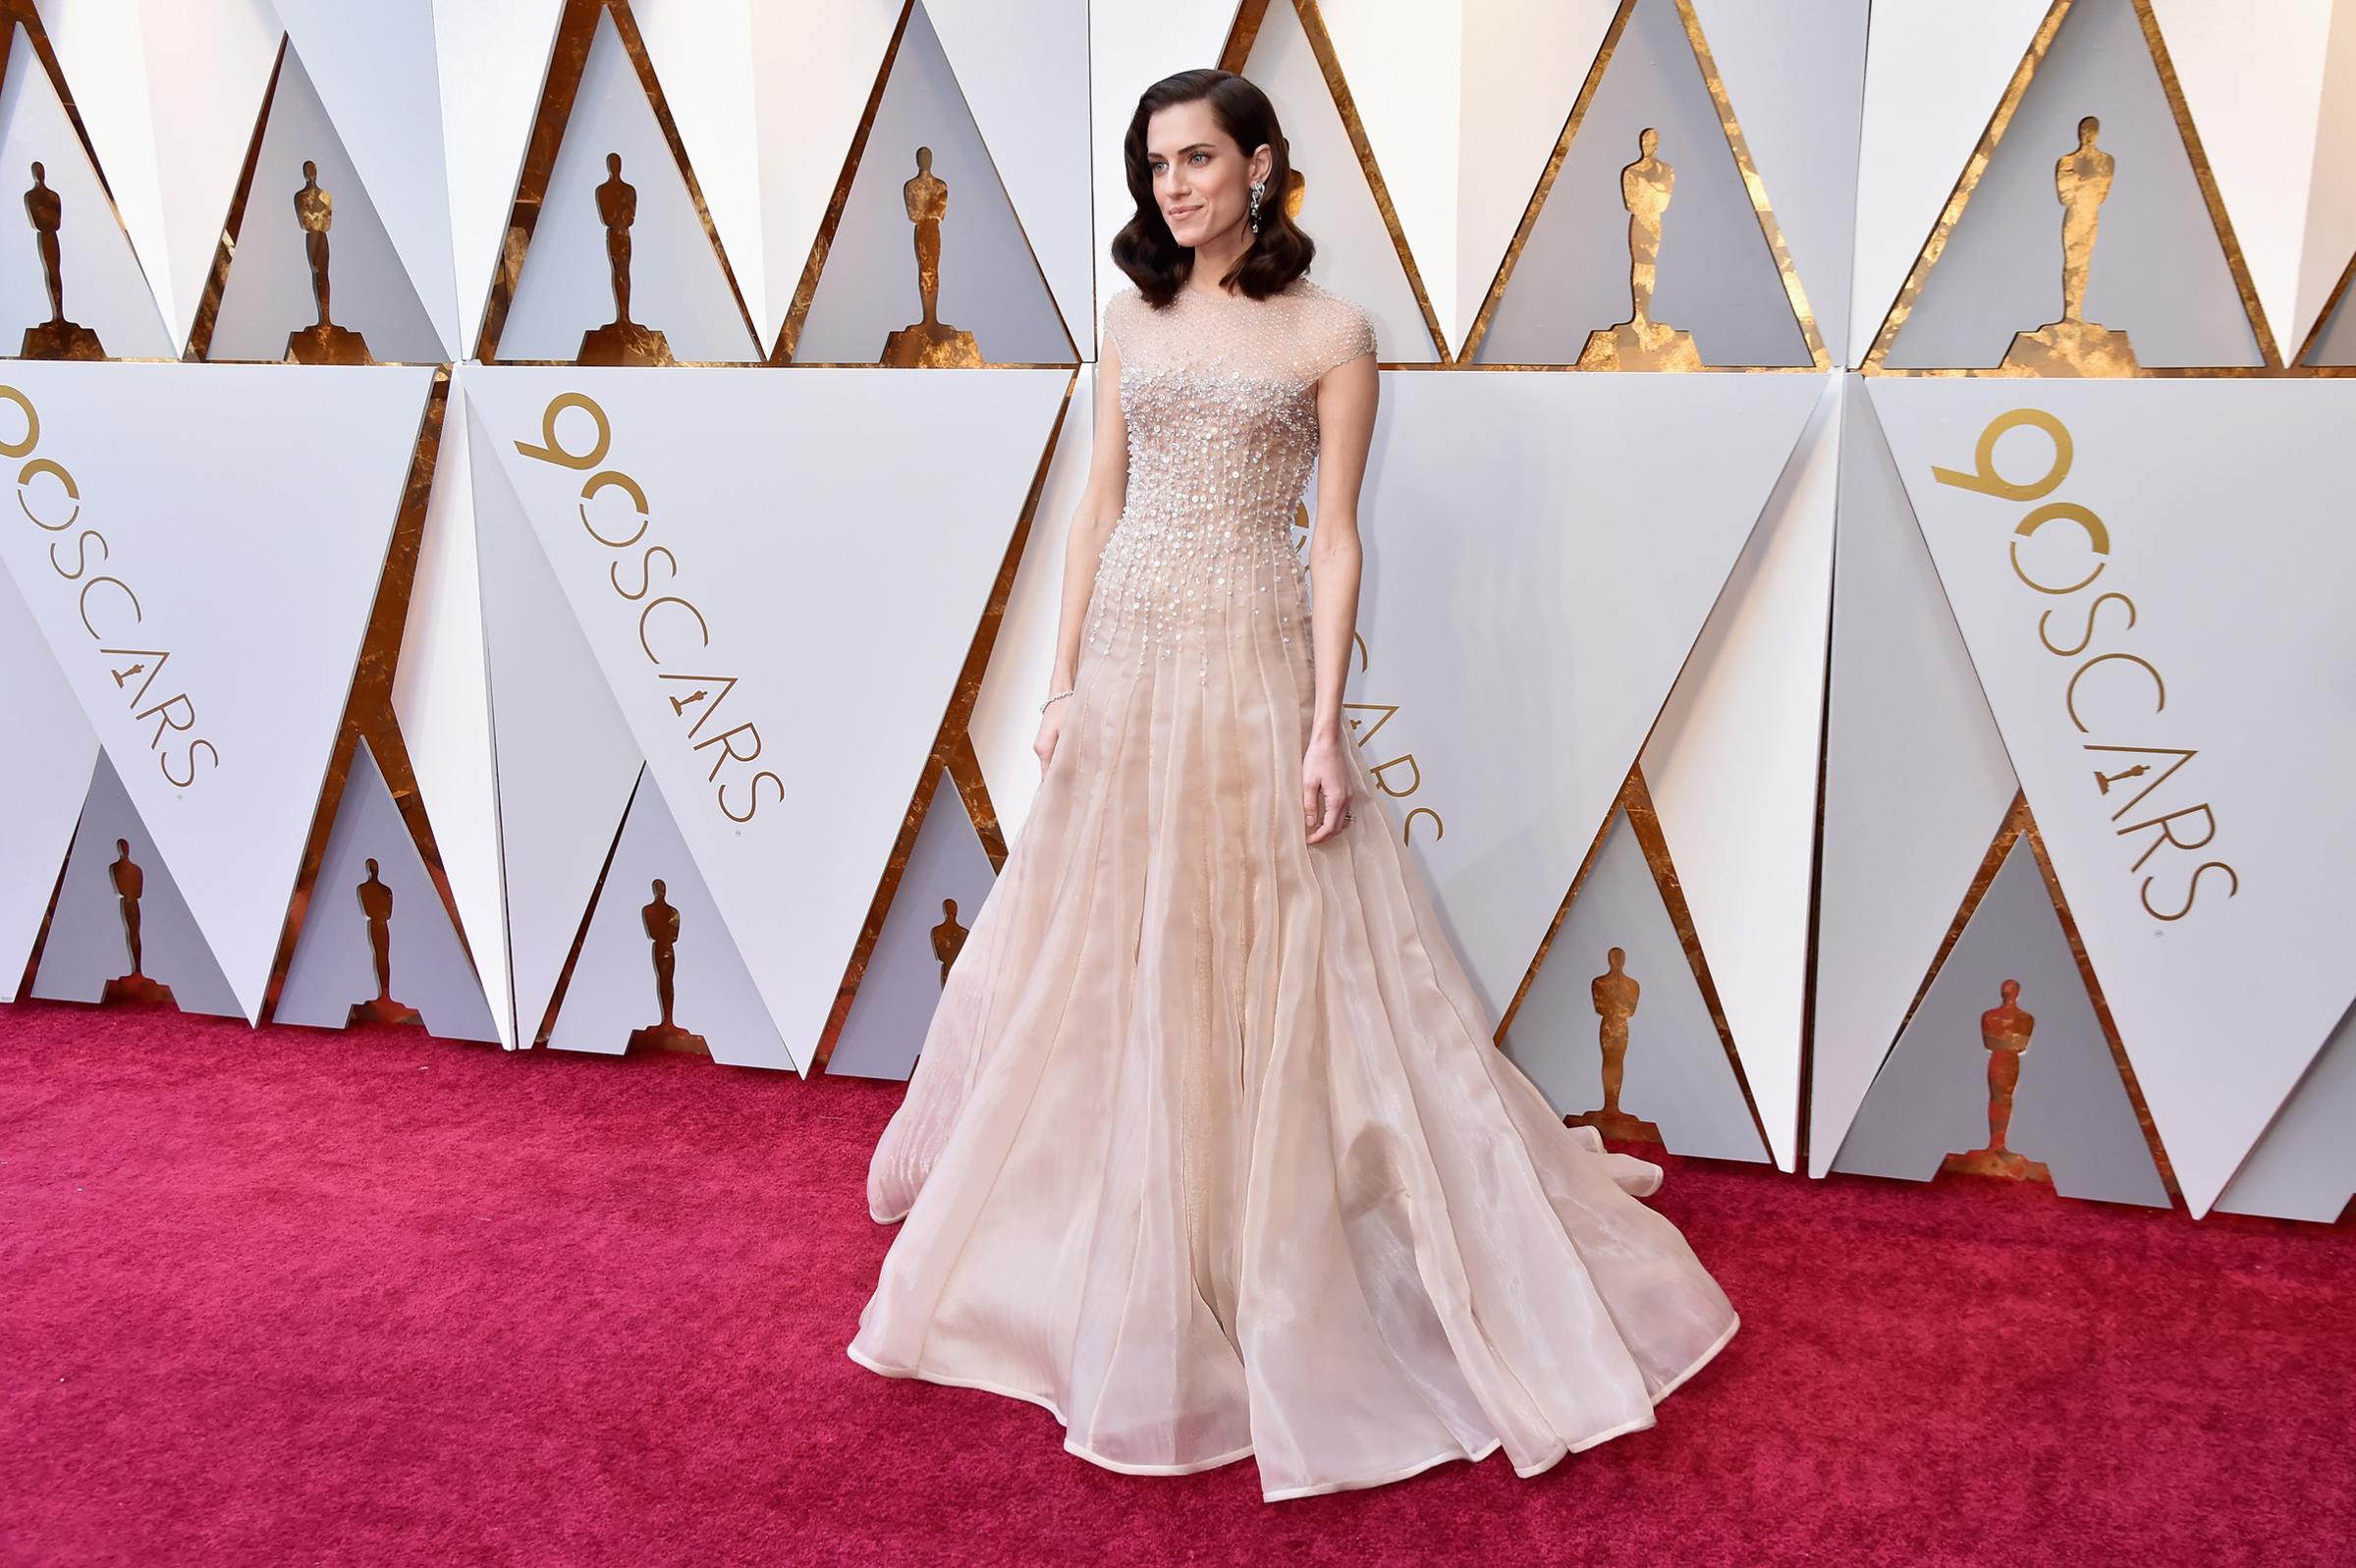 90th Annual Academy Awards Oscars red carpet dresses suits outfits